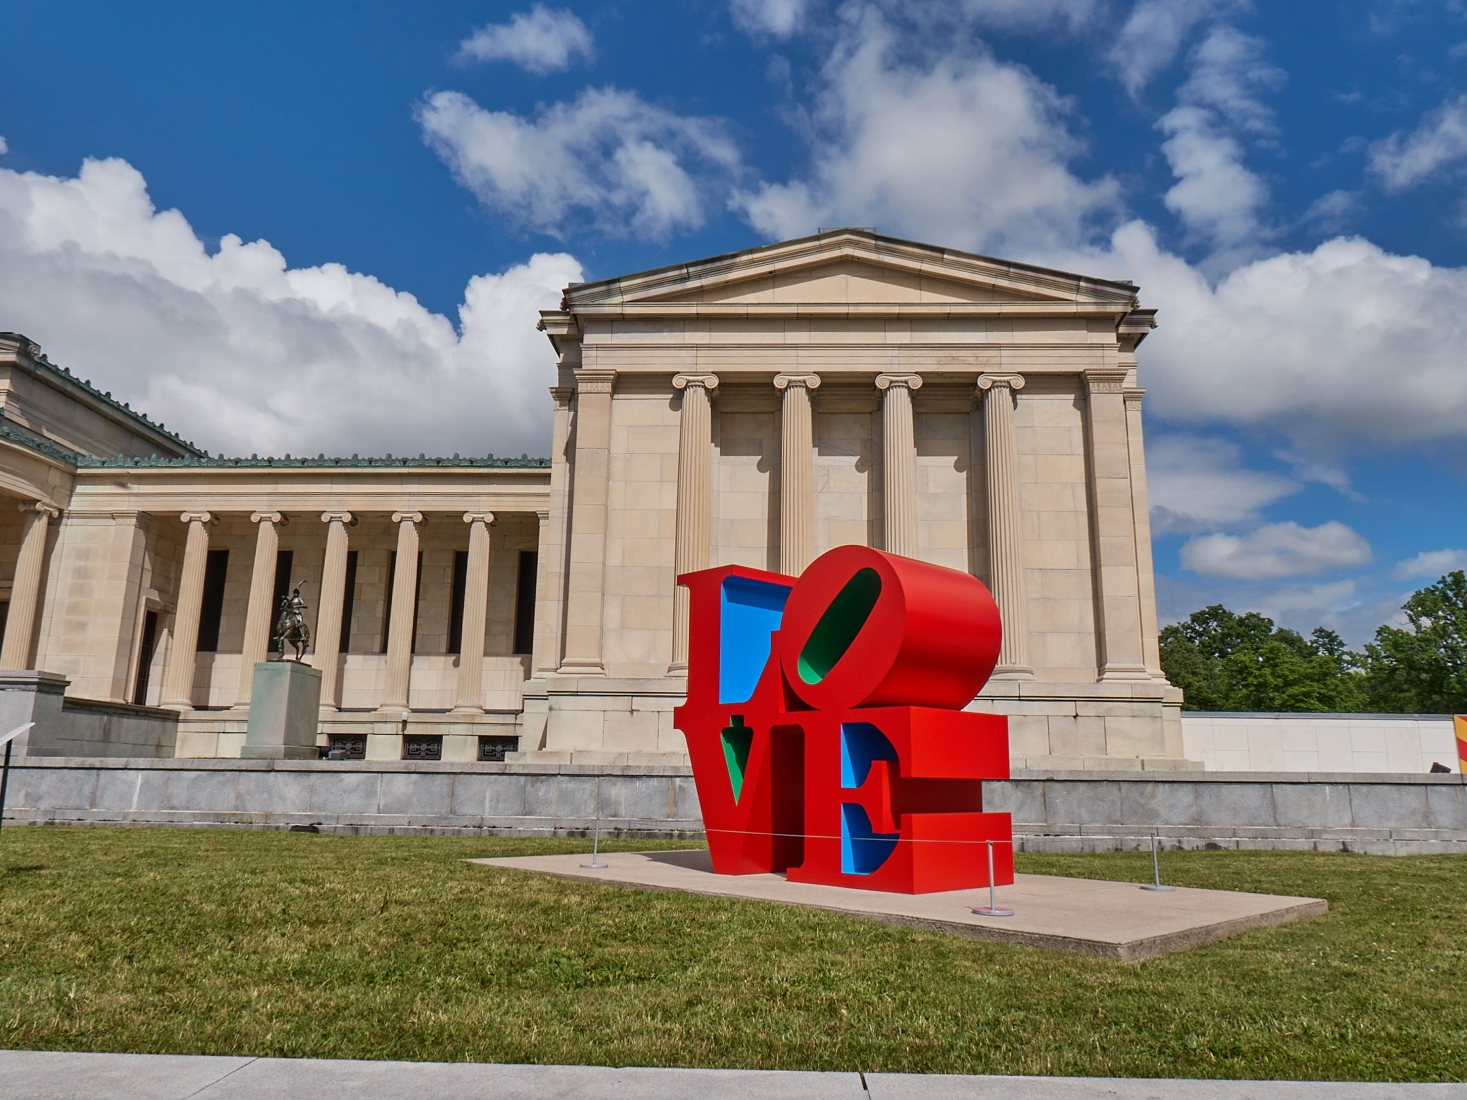 LOVE (red blue green) on display in front of the Albright-Knox for the exhibition Robert Indiana: A Sculpture Retrospective, 2018